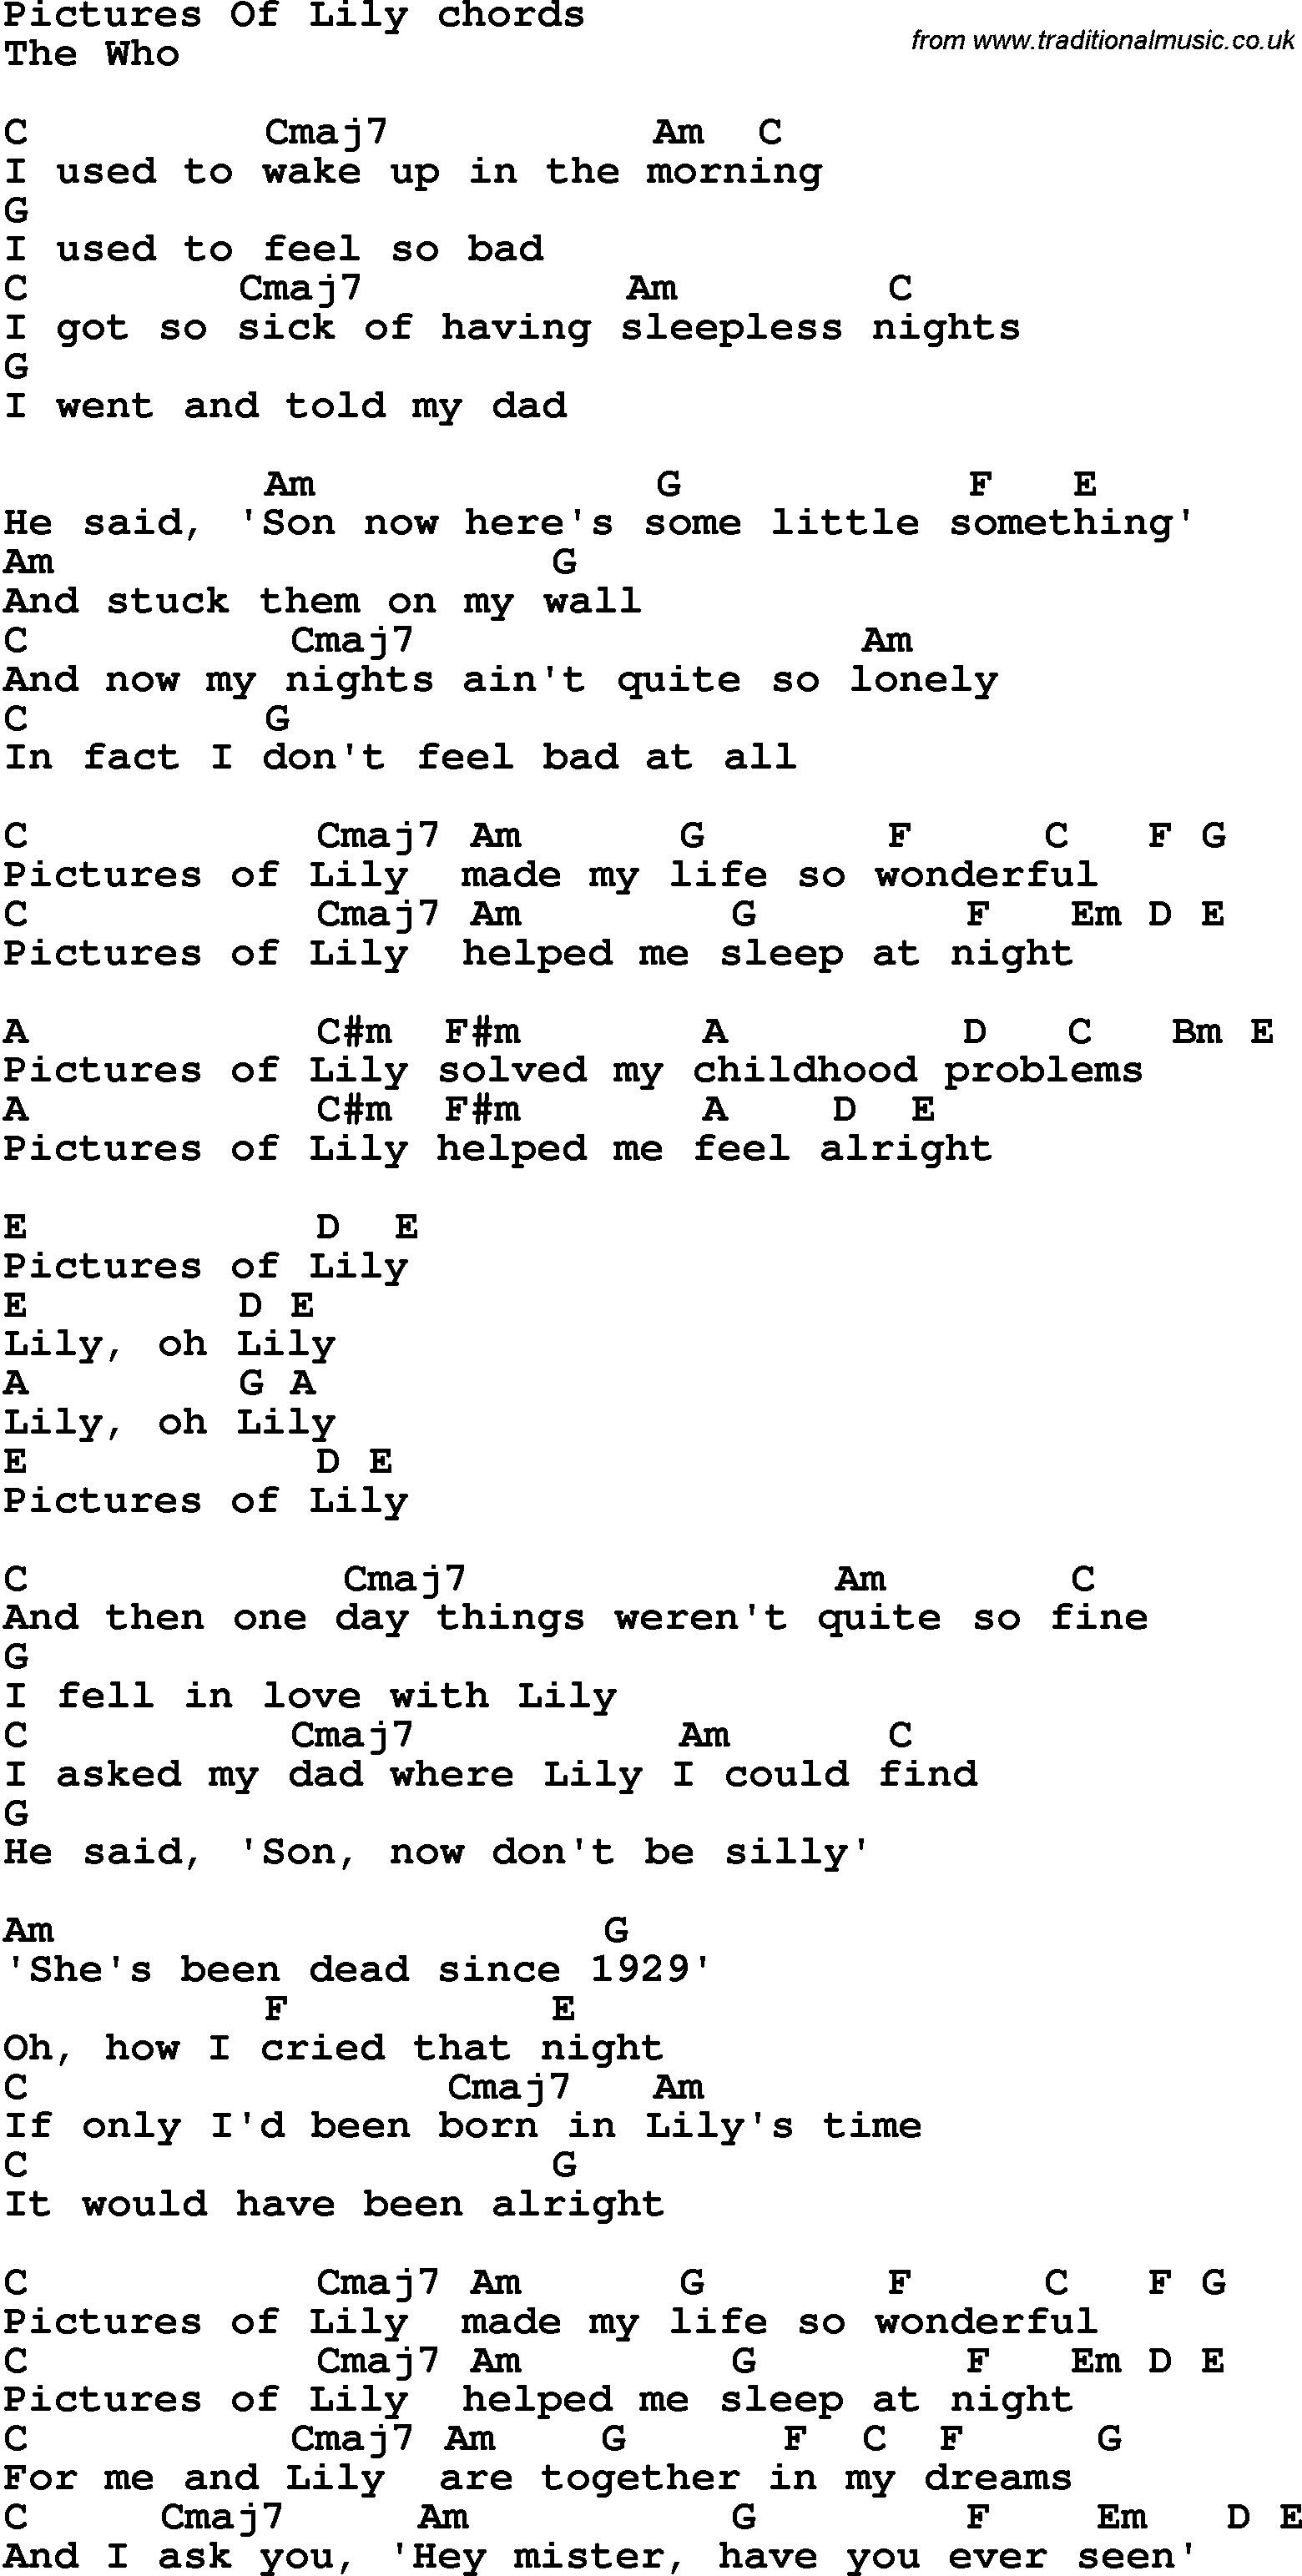 Song Lyrics with guitar chords for Pictures Of Lily